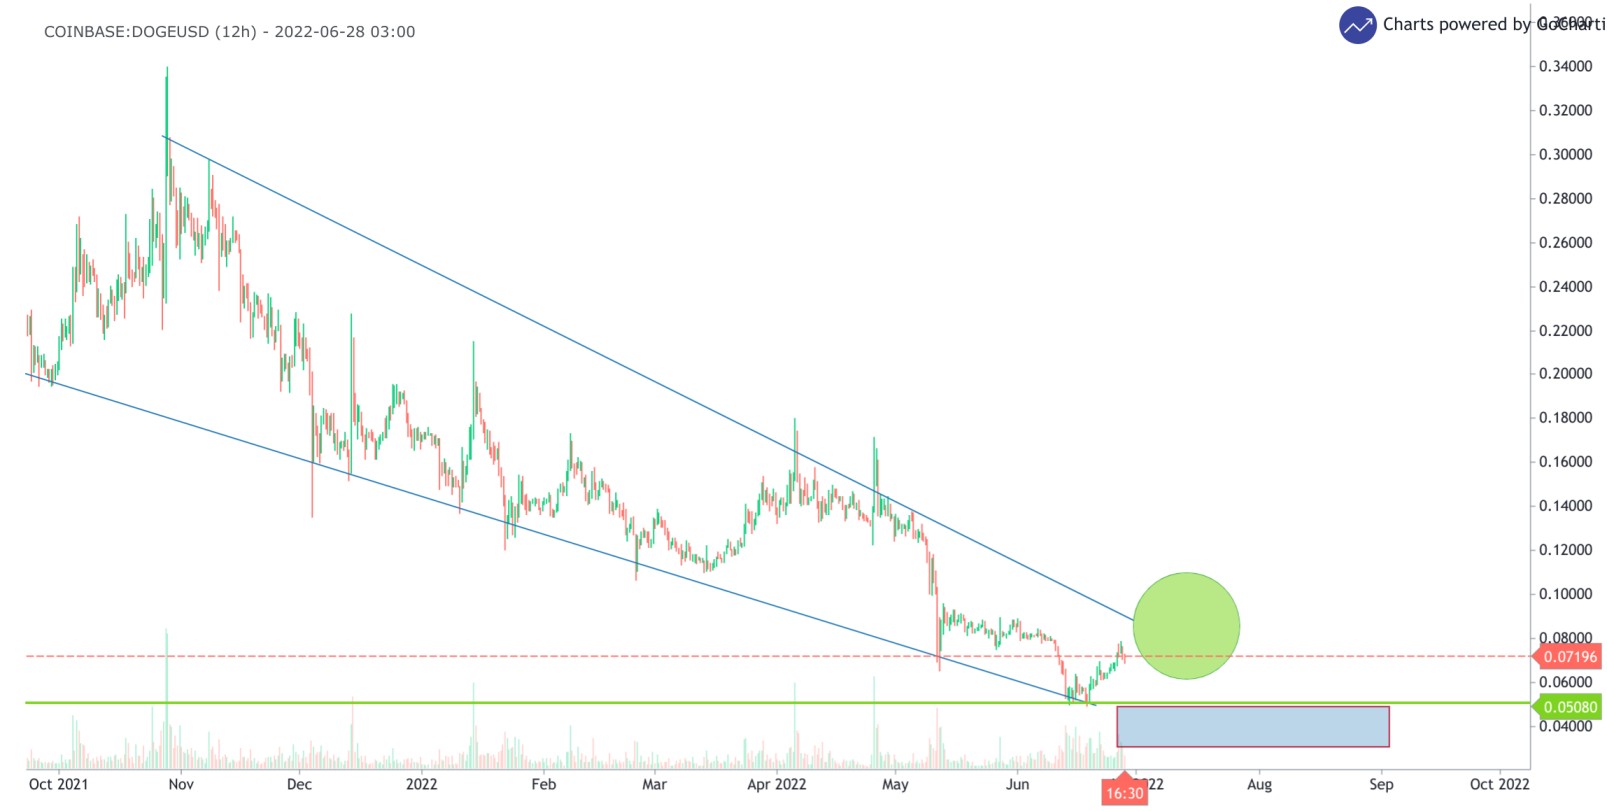 DOGE/USD 12-hours chart showing the important areas of DOGE